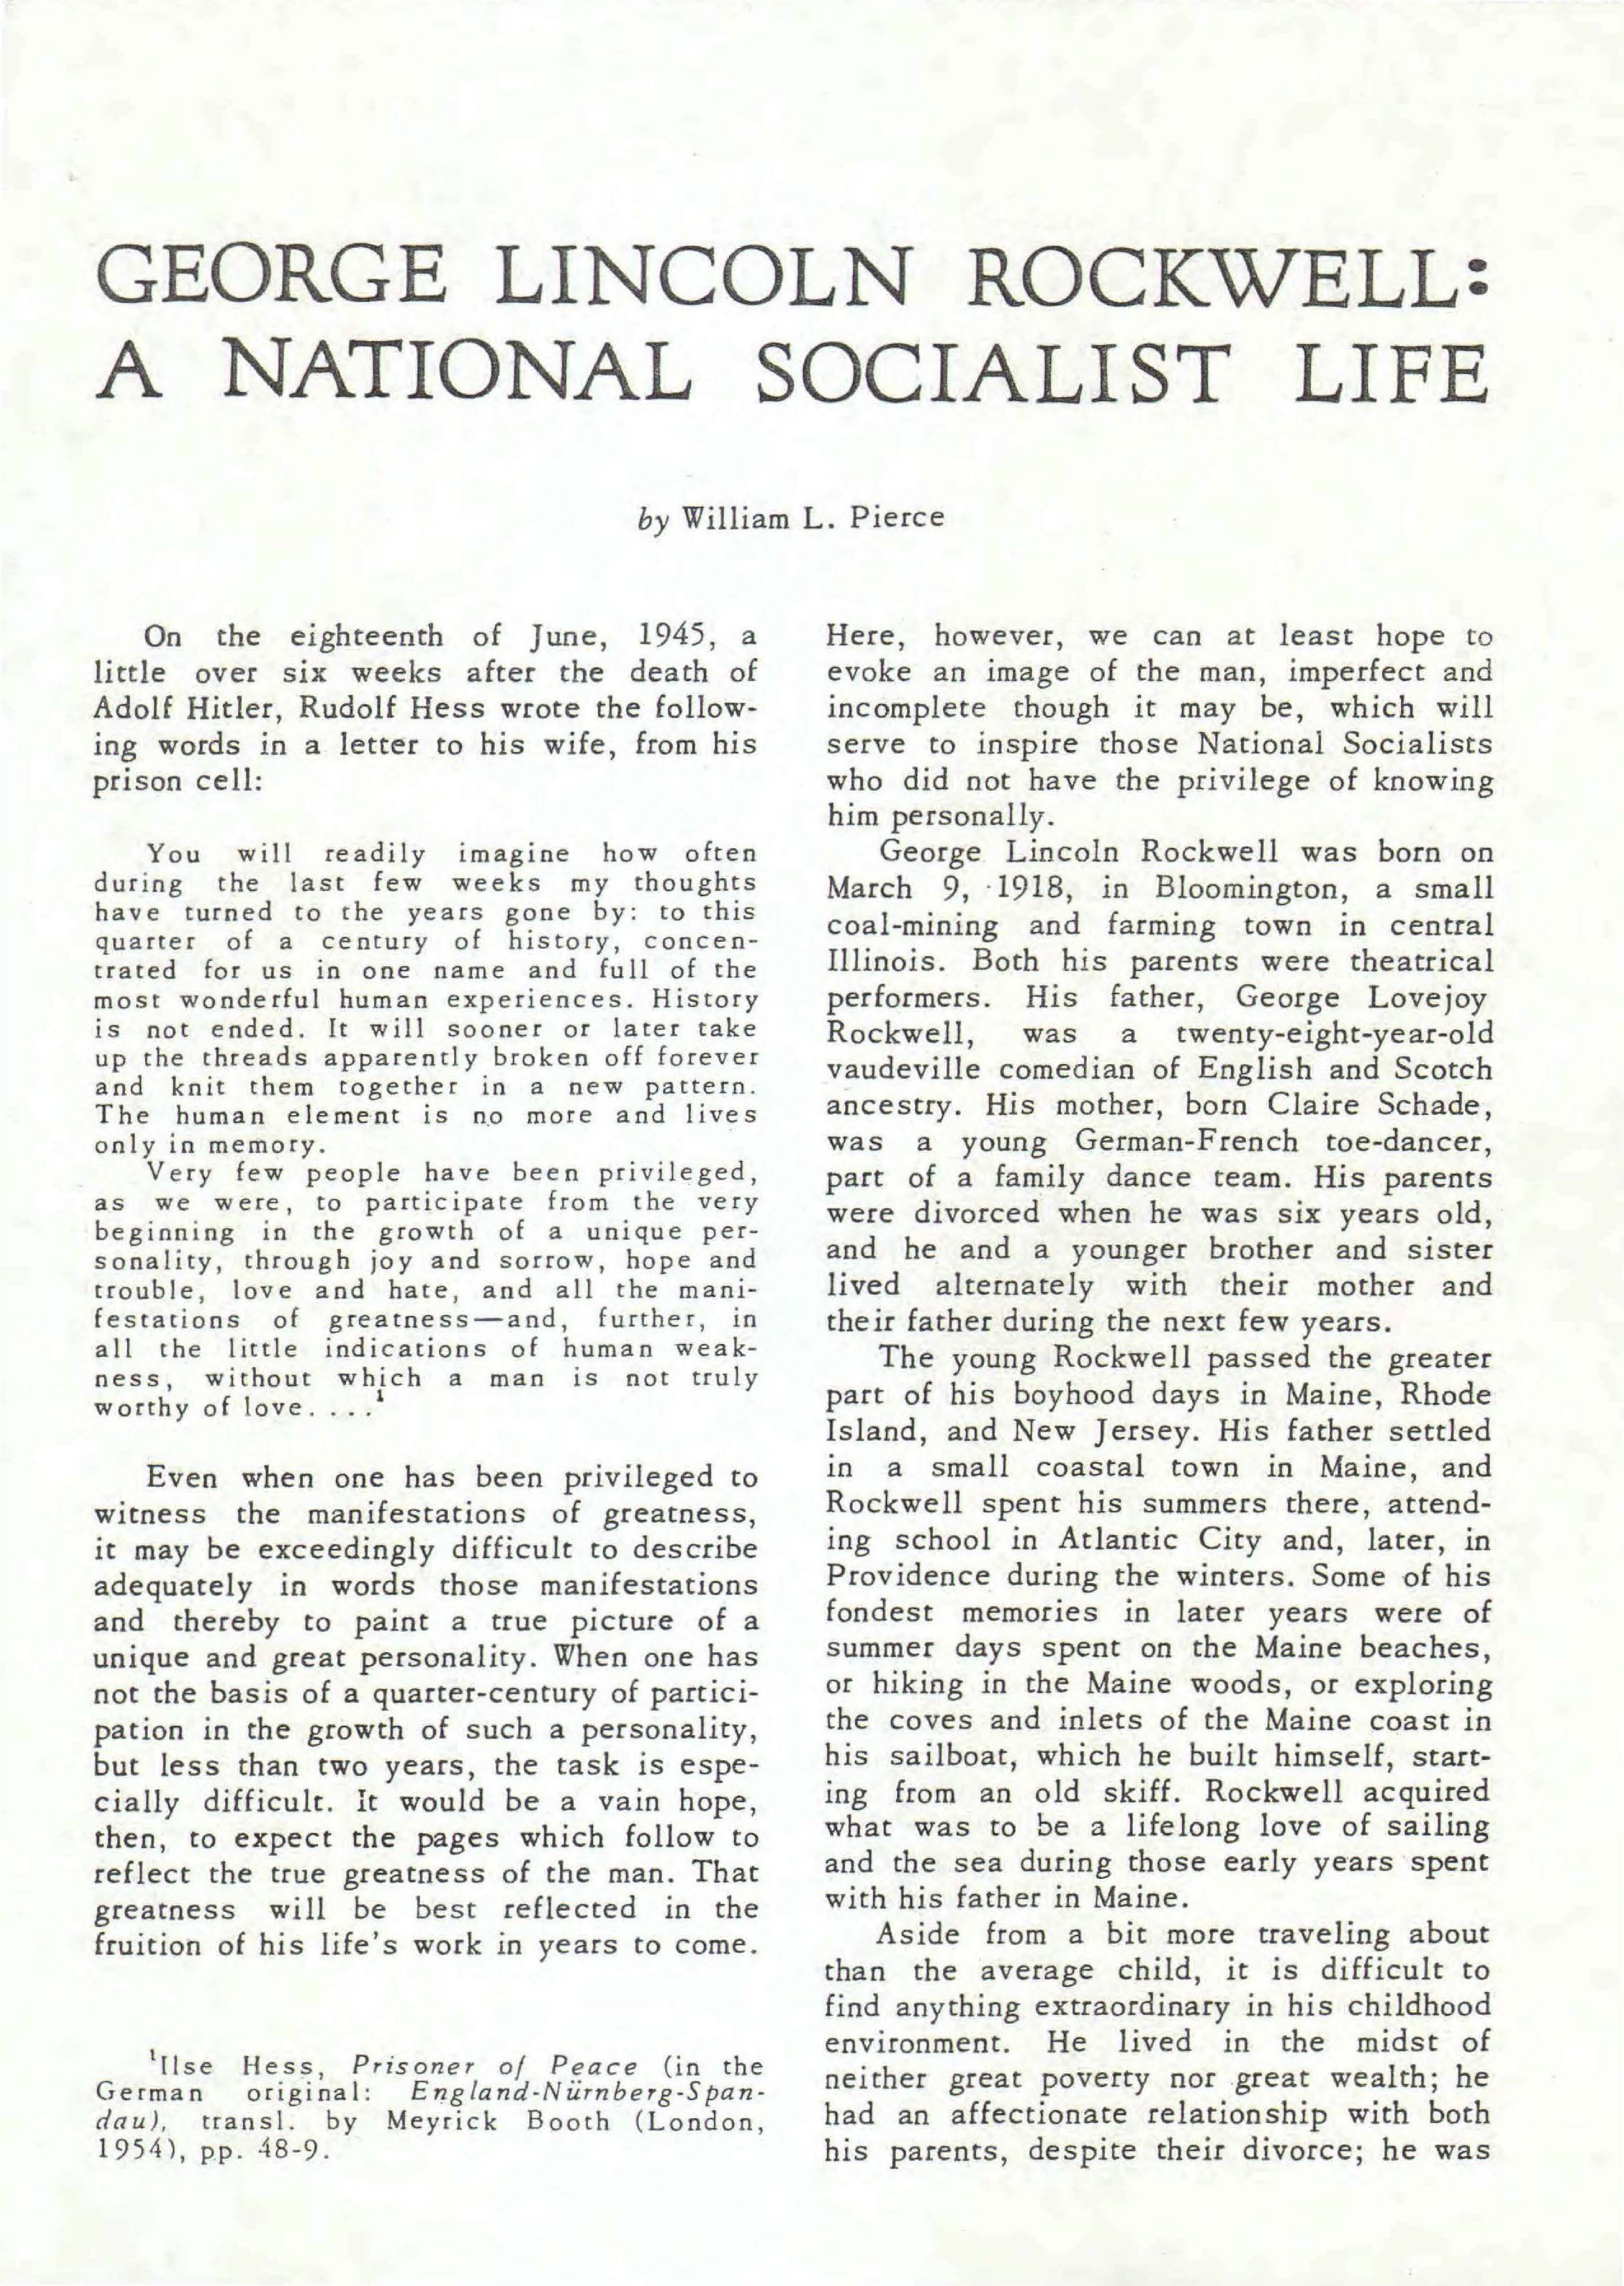 George Lincoln Rockwell: A National Socialist Life